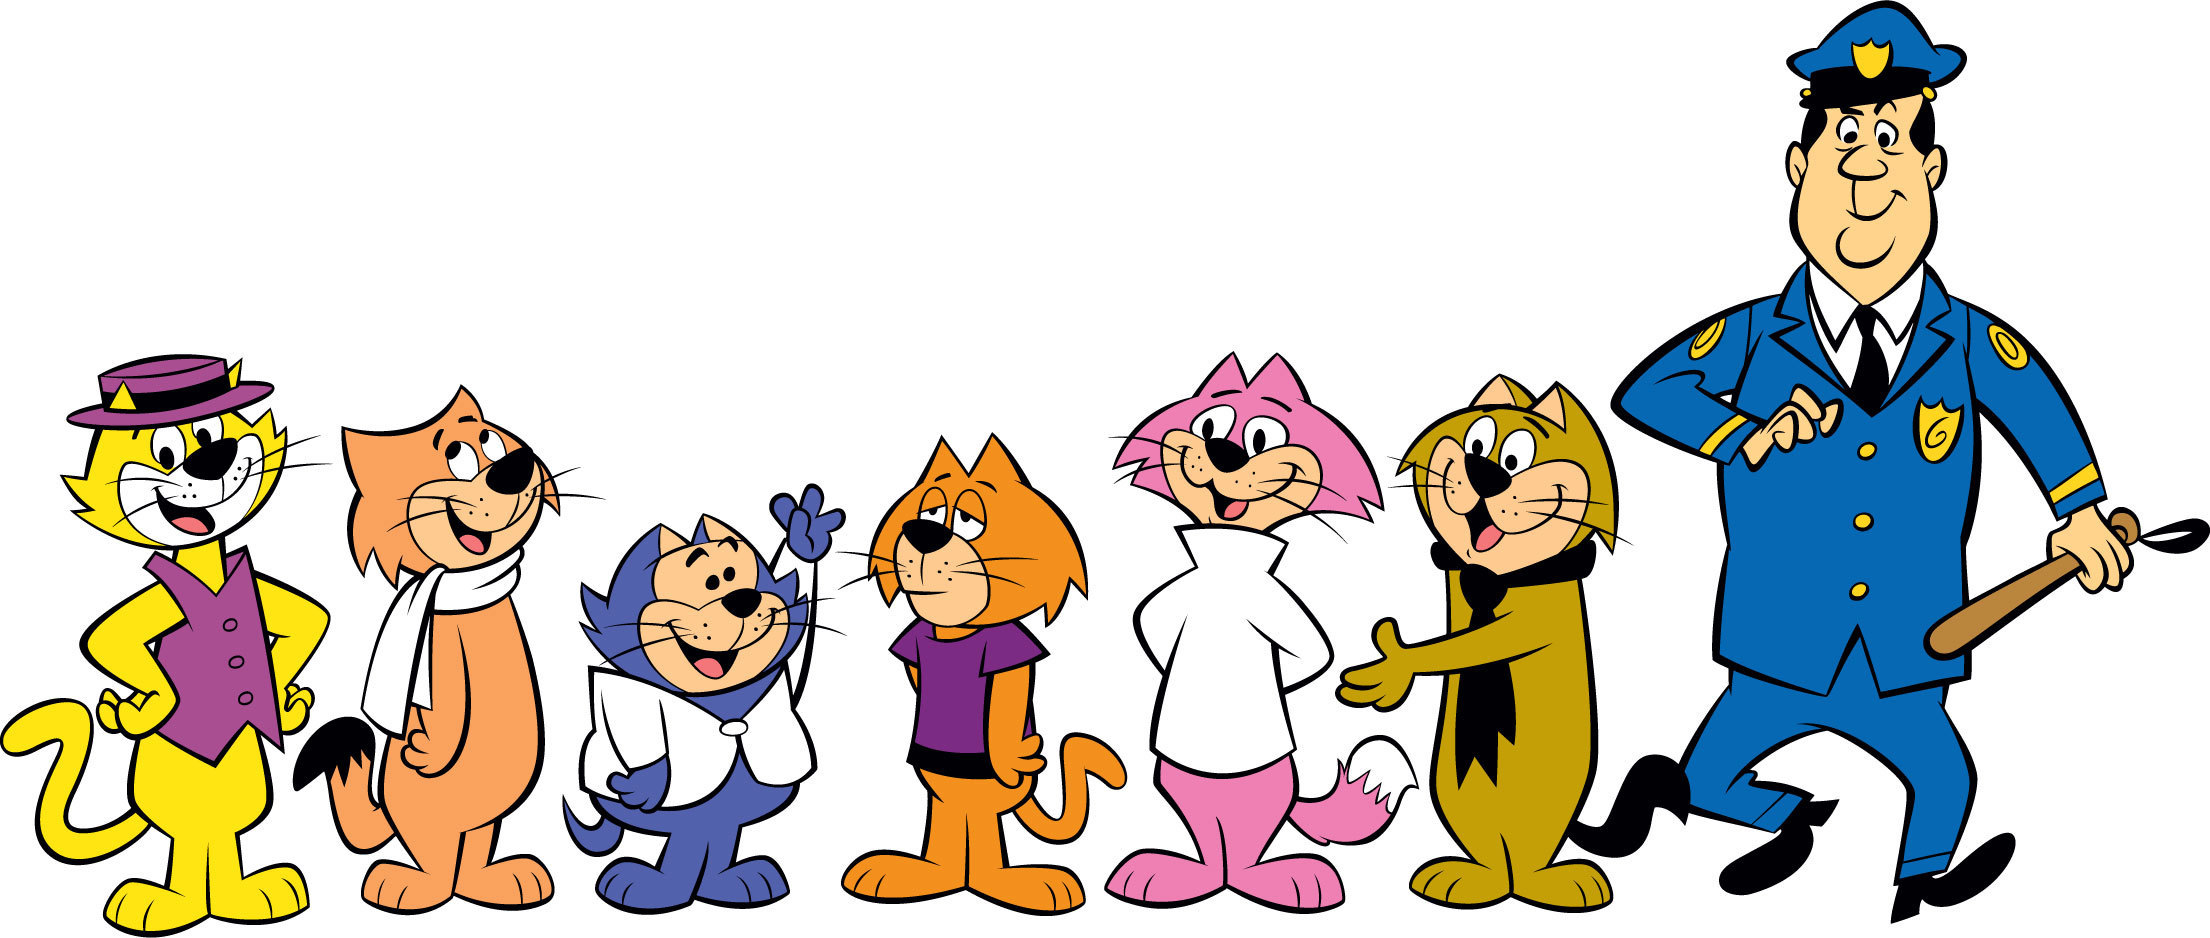 Top Cat Image Tc And The Gang HD Wallpaper Background